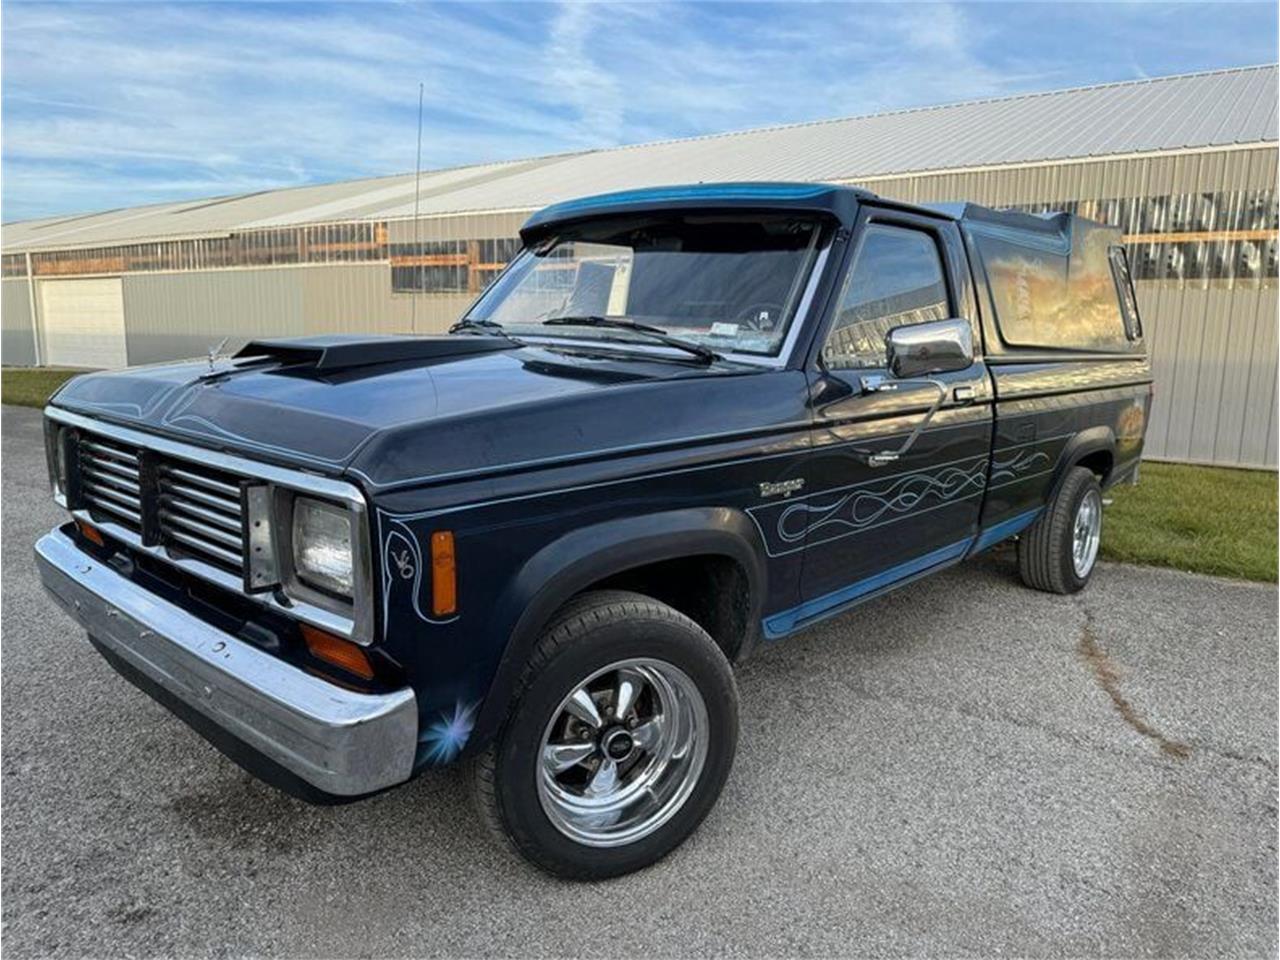 1983 Ford Ranger Is an Affordable Classic Ready for Work or Play